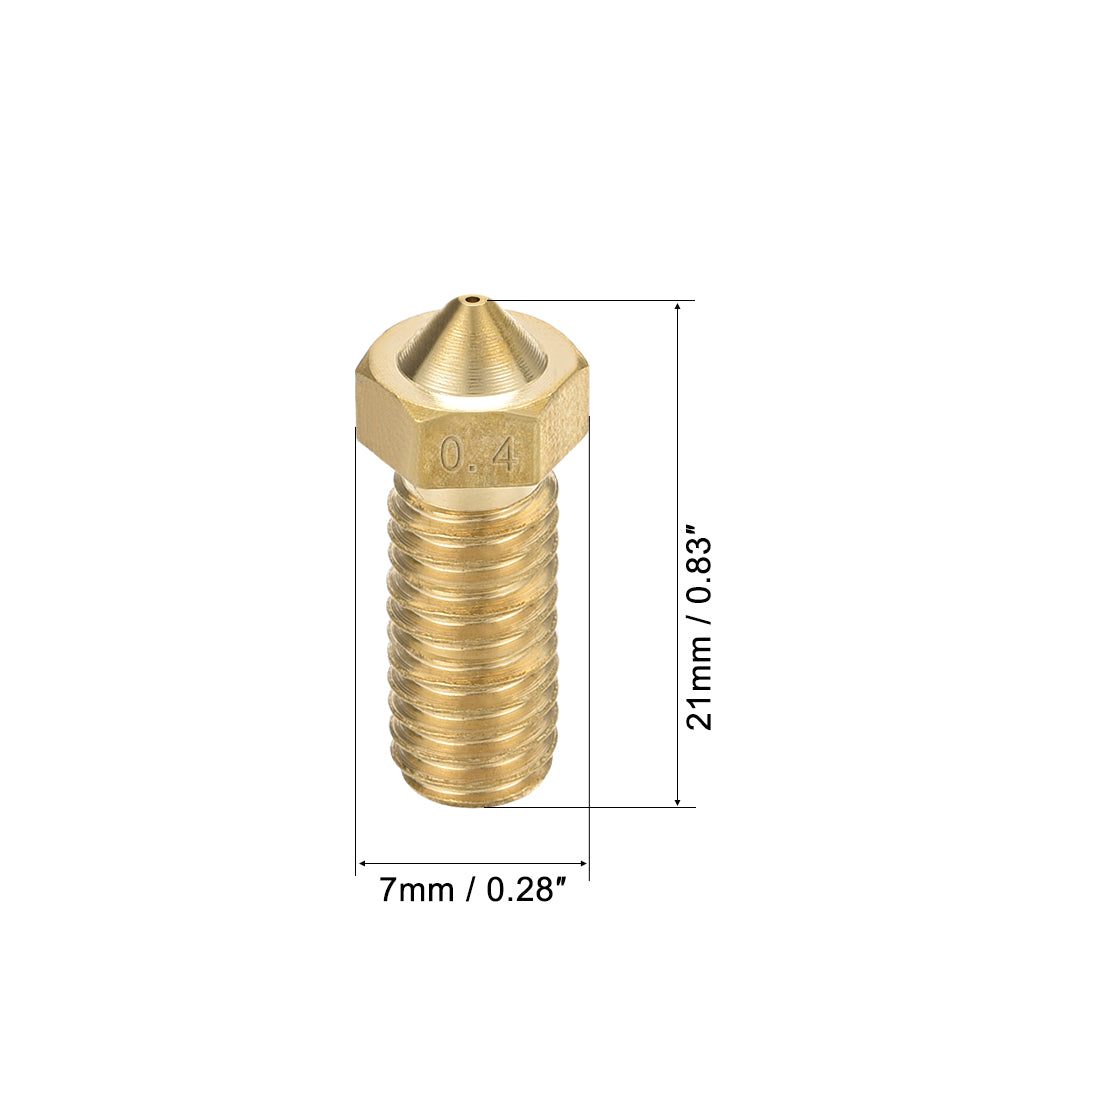 uxcell Uxcell 0.4mm 3D Printer Nozzle, Fit for V6, for 1.75mm Filament Brass 5pcs